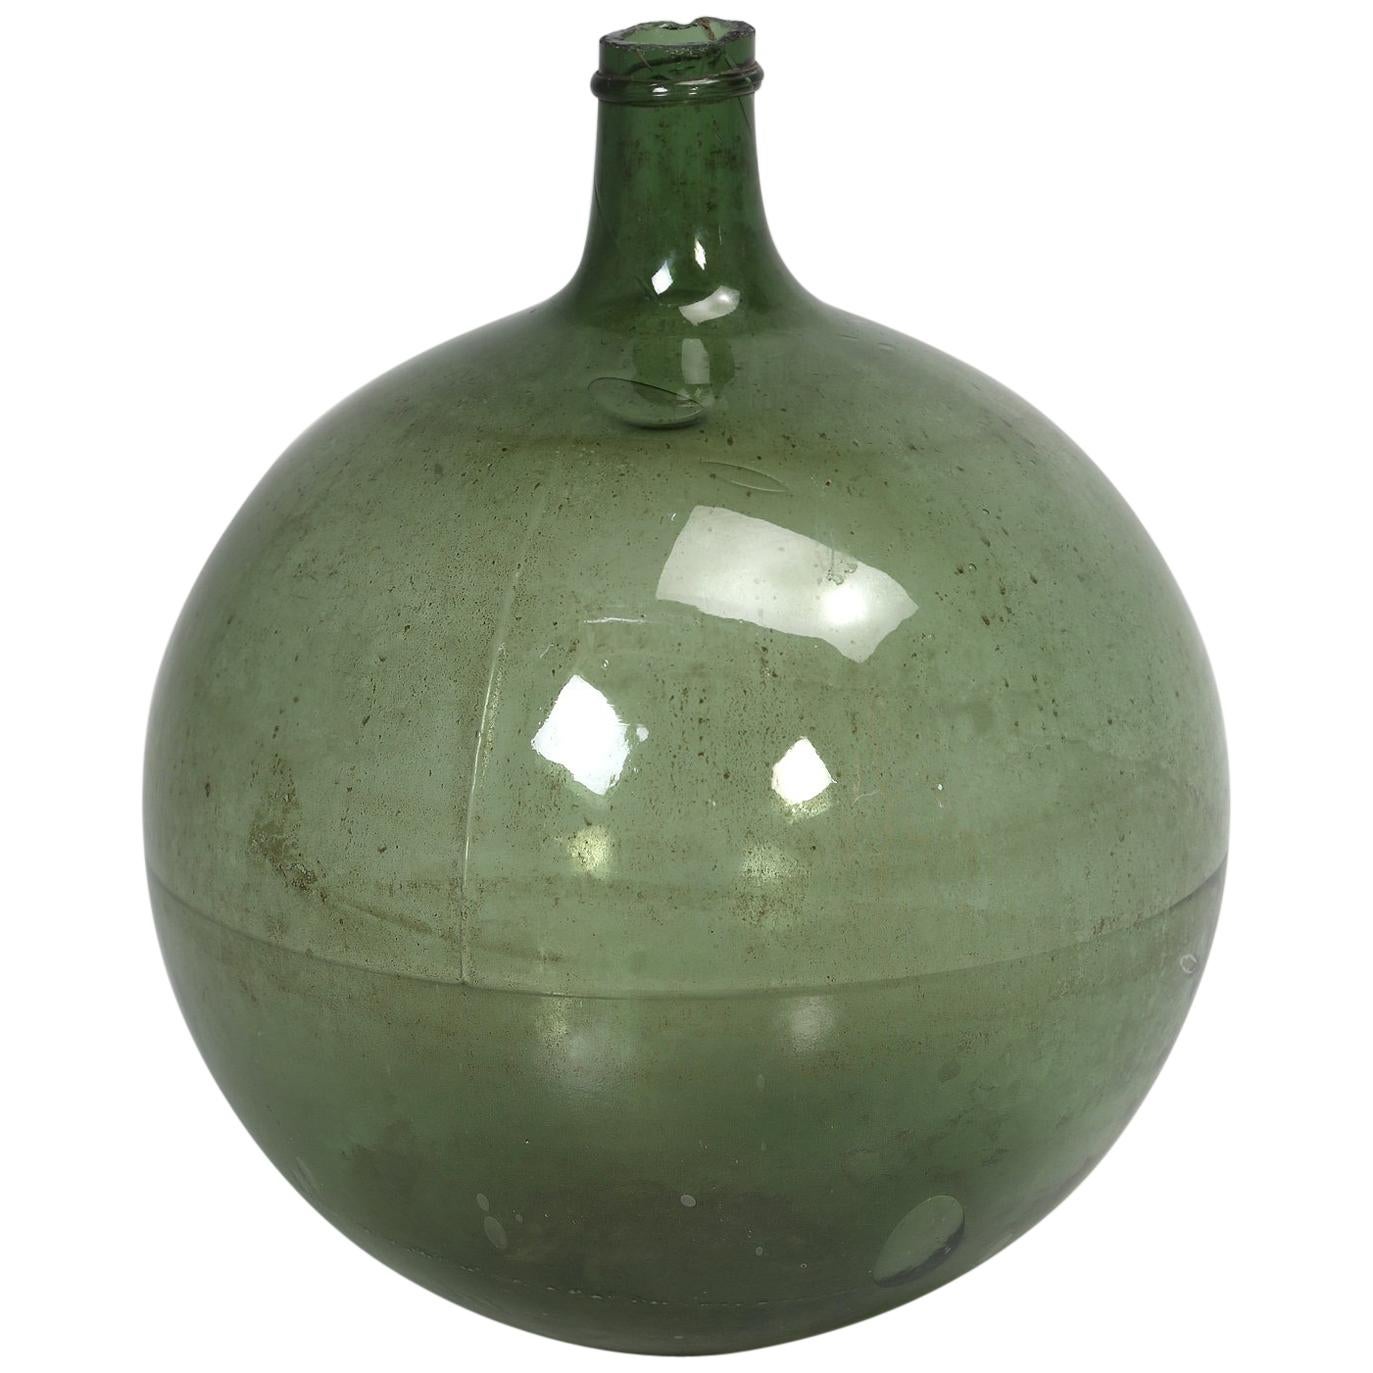 Classic Antique French Demijon or Carboy, circa 1880-1900